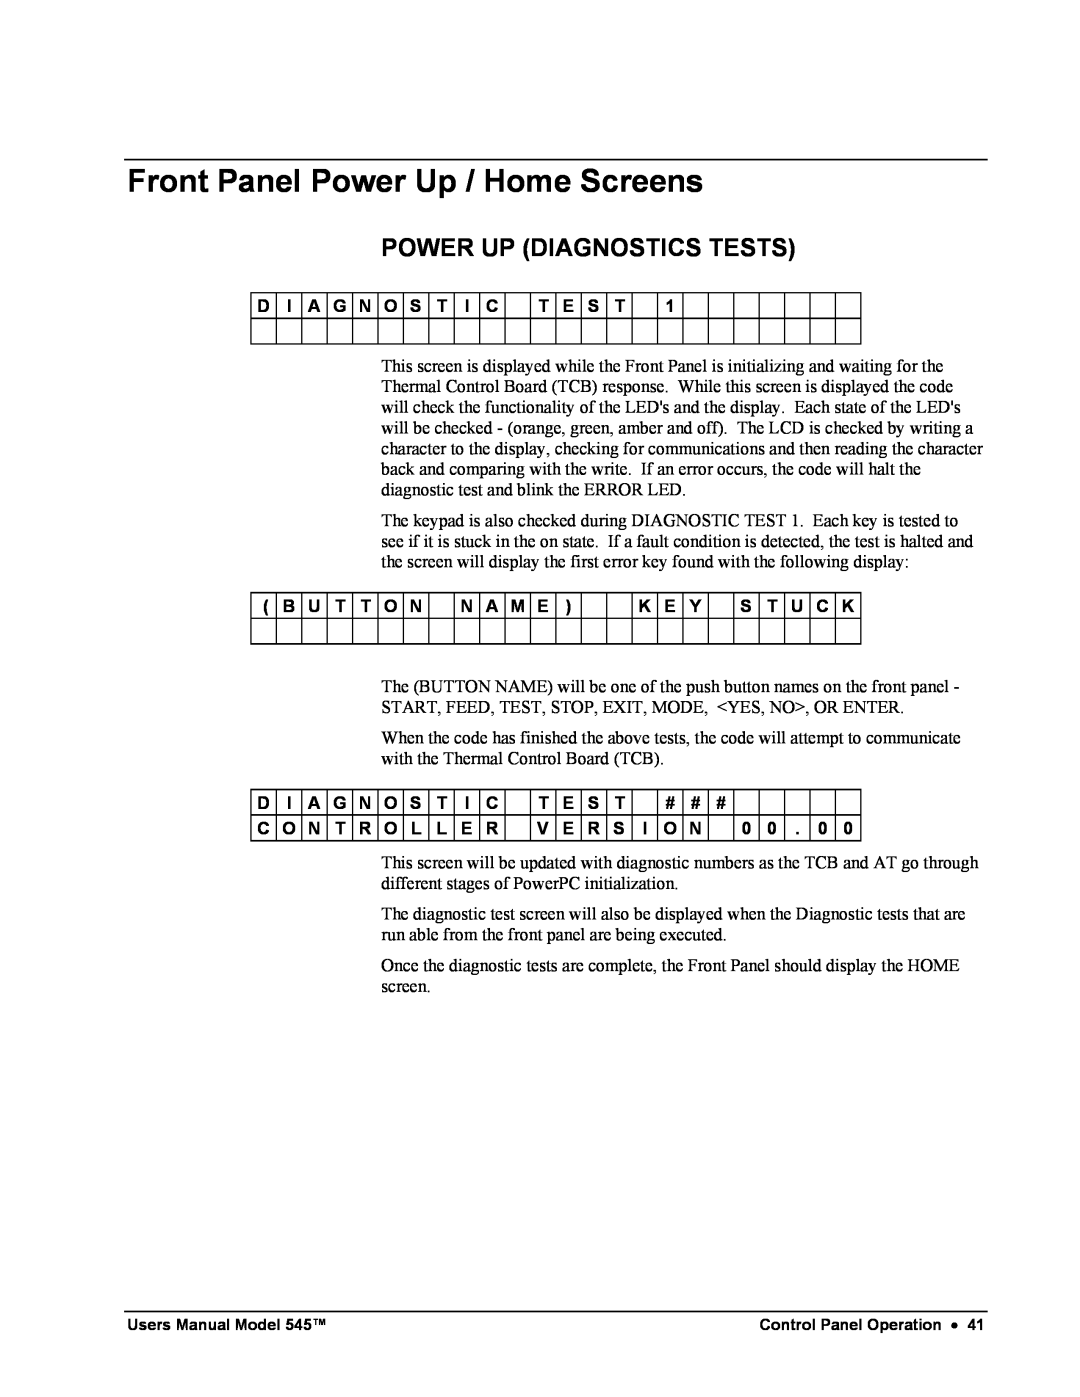 Paxar 545 user manual Front Panel Power Up / Home Screens, Power Up Diagnostics Tests 